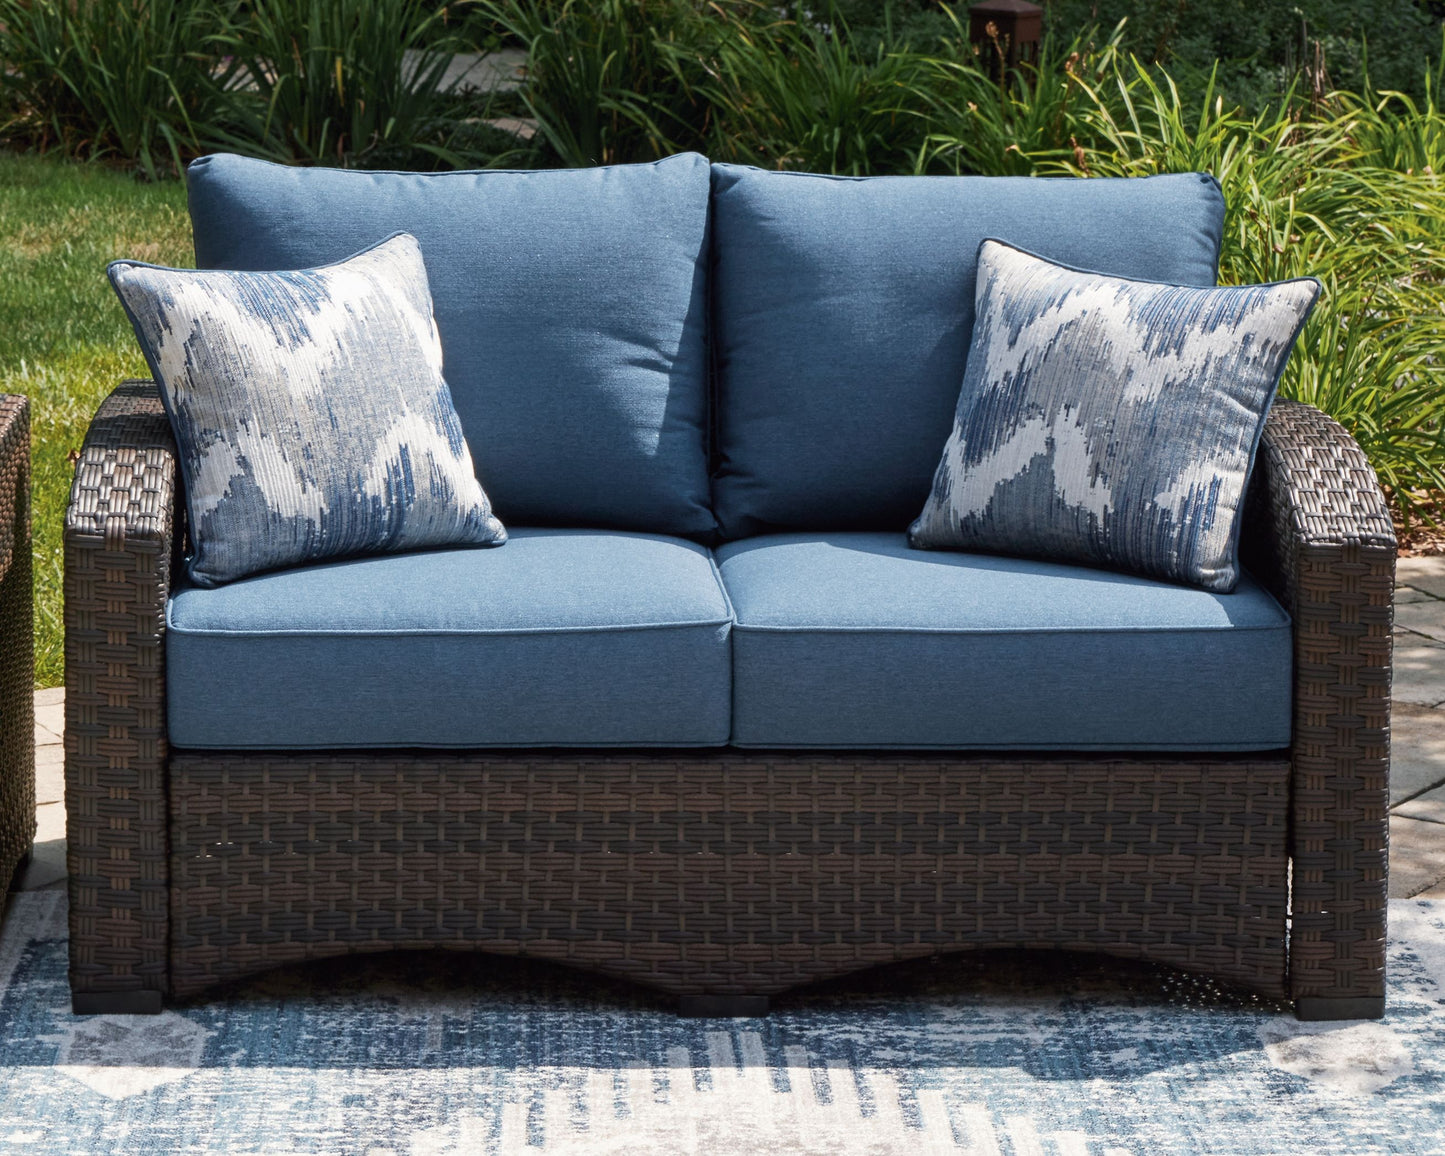 Windglow - Blue / Brown - Loveseat With Cushion